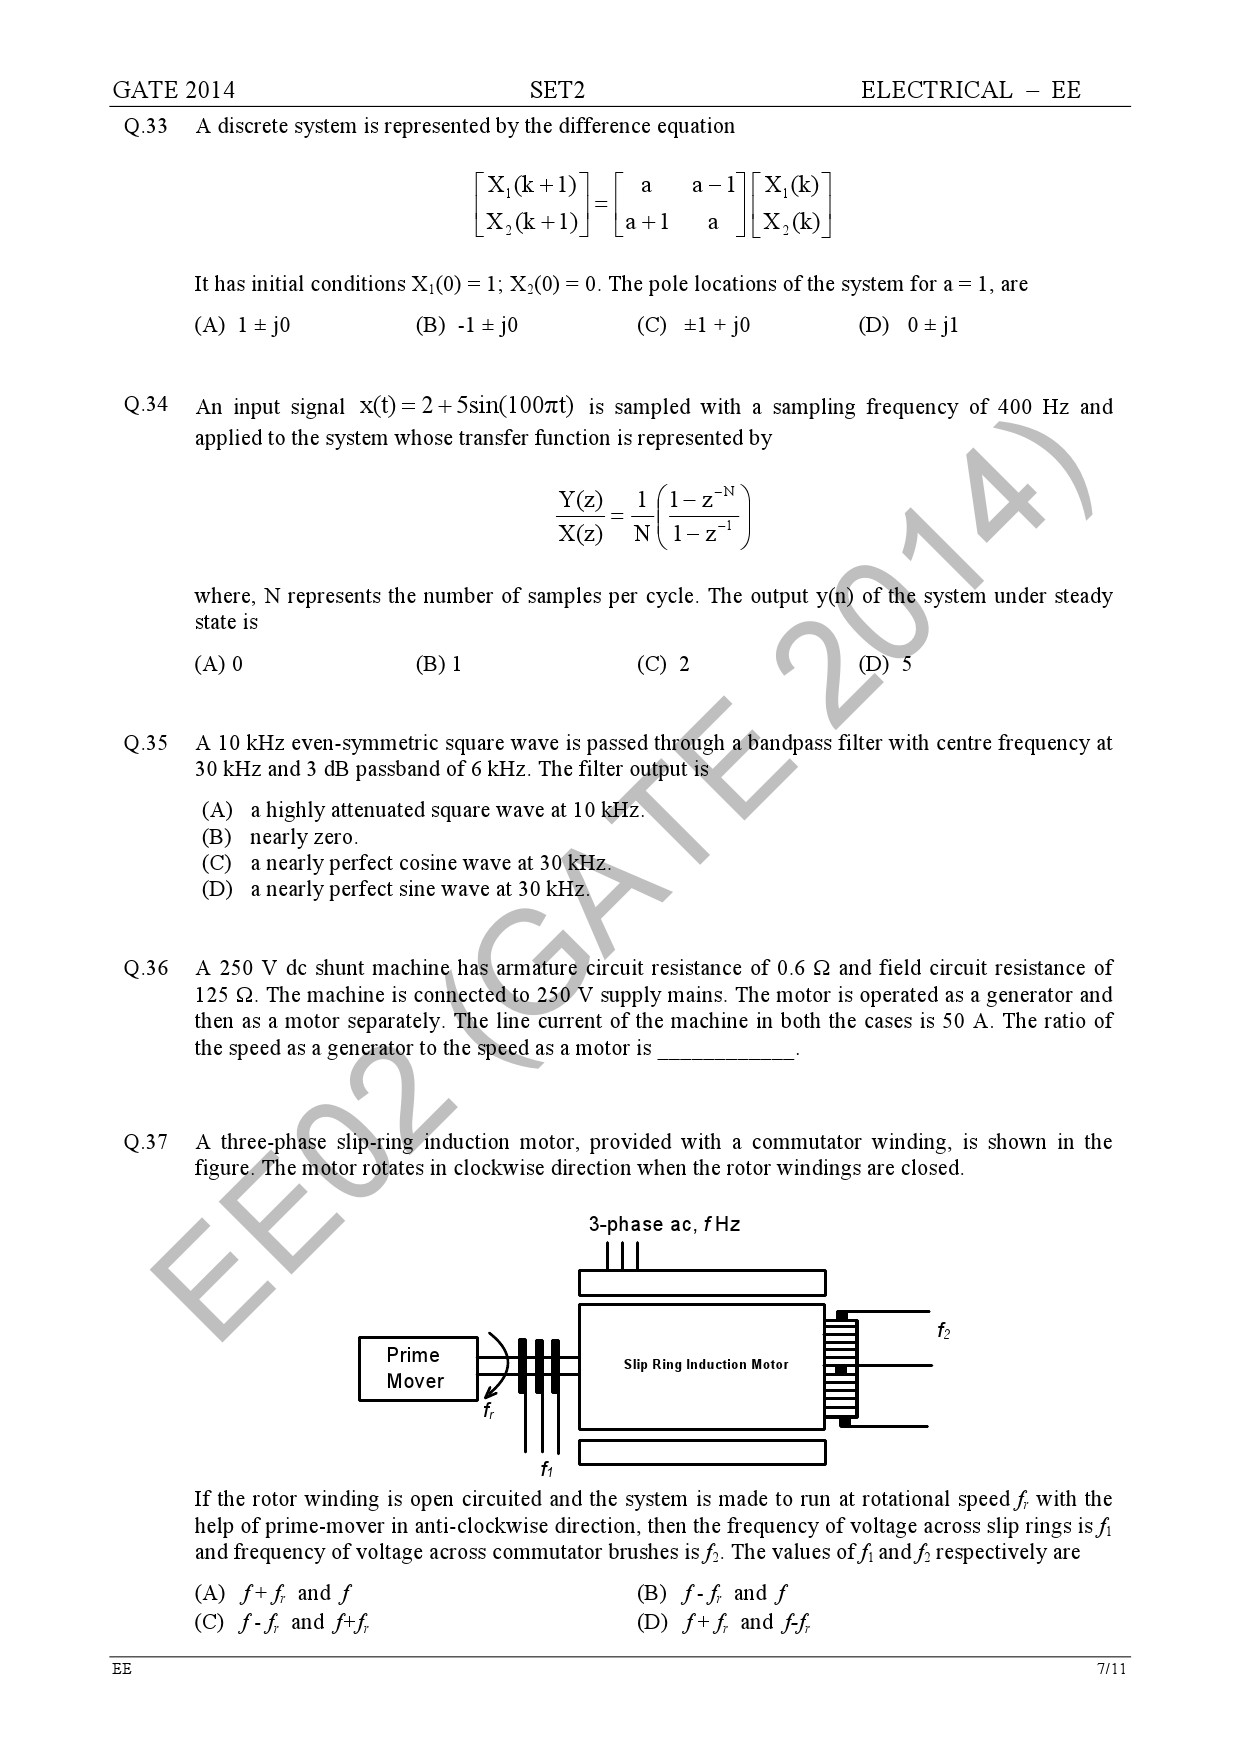 GATE Exam Question Paper 2014 Electrical Engineering Set 2 13